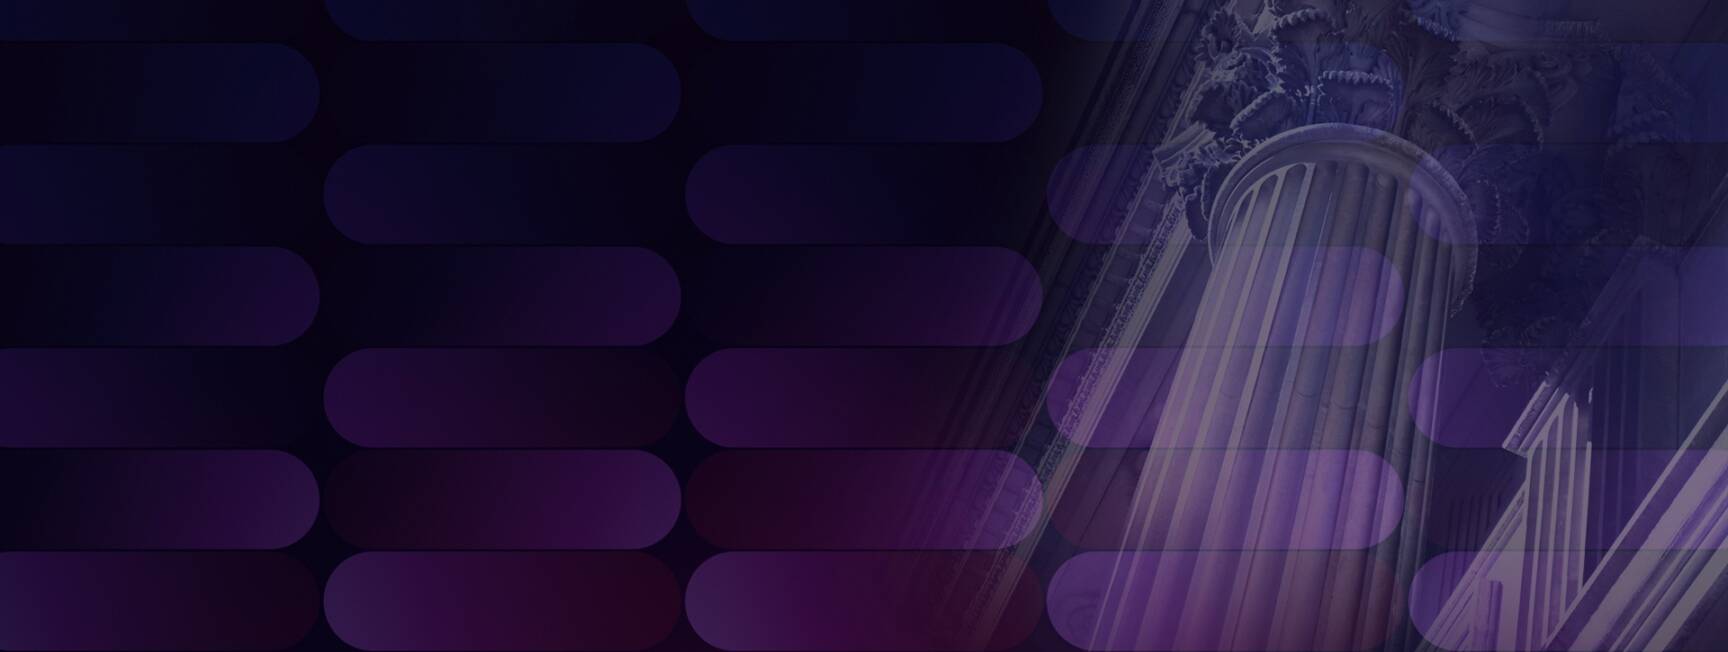 A purple and black abstract background